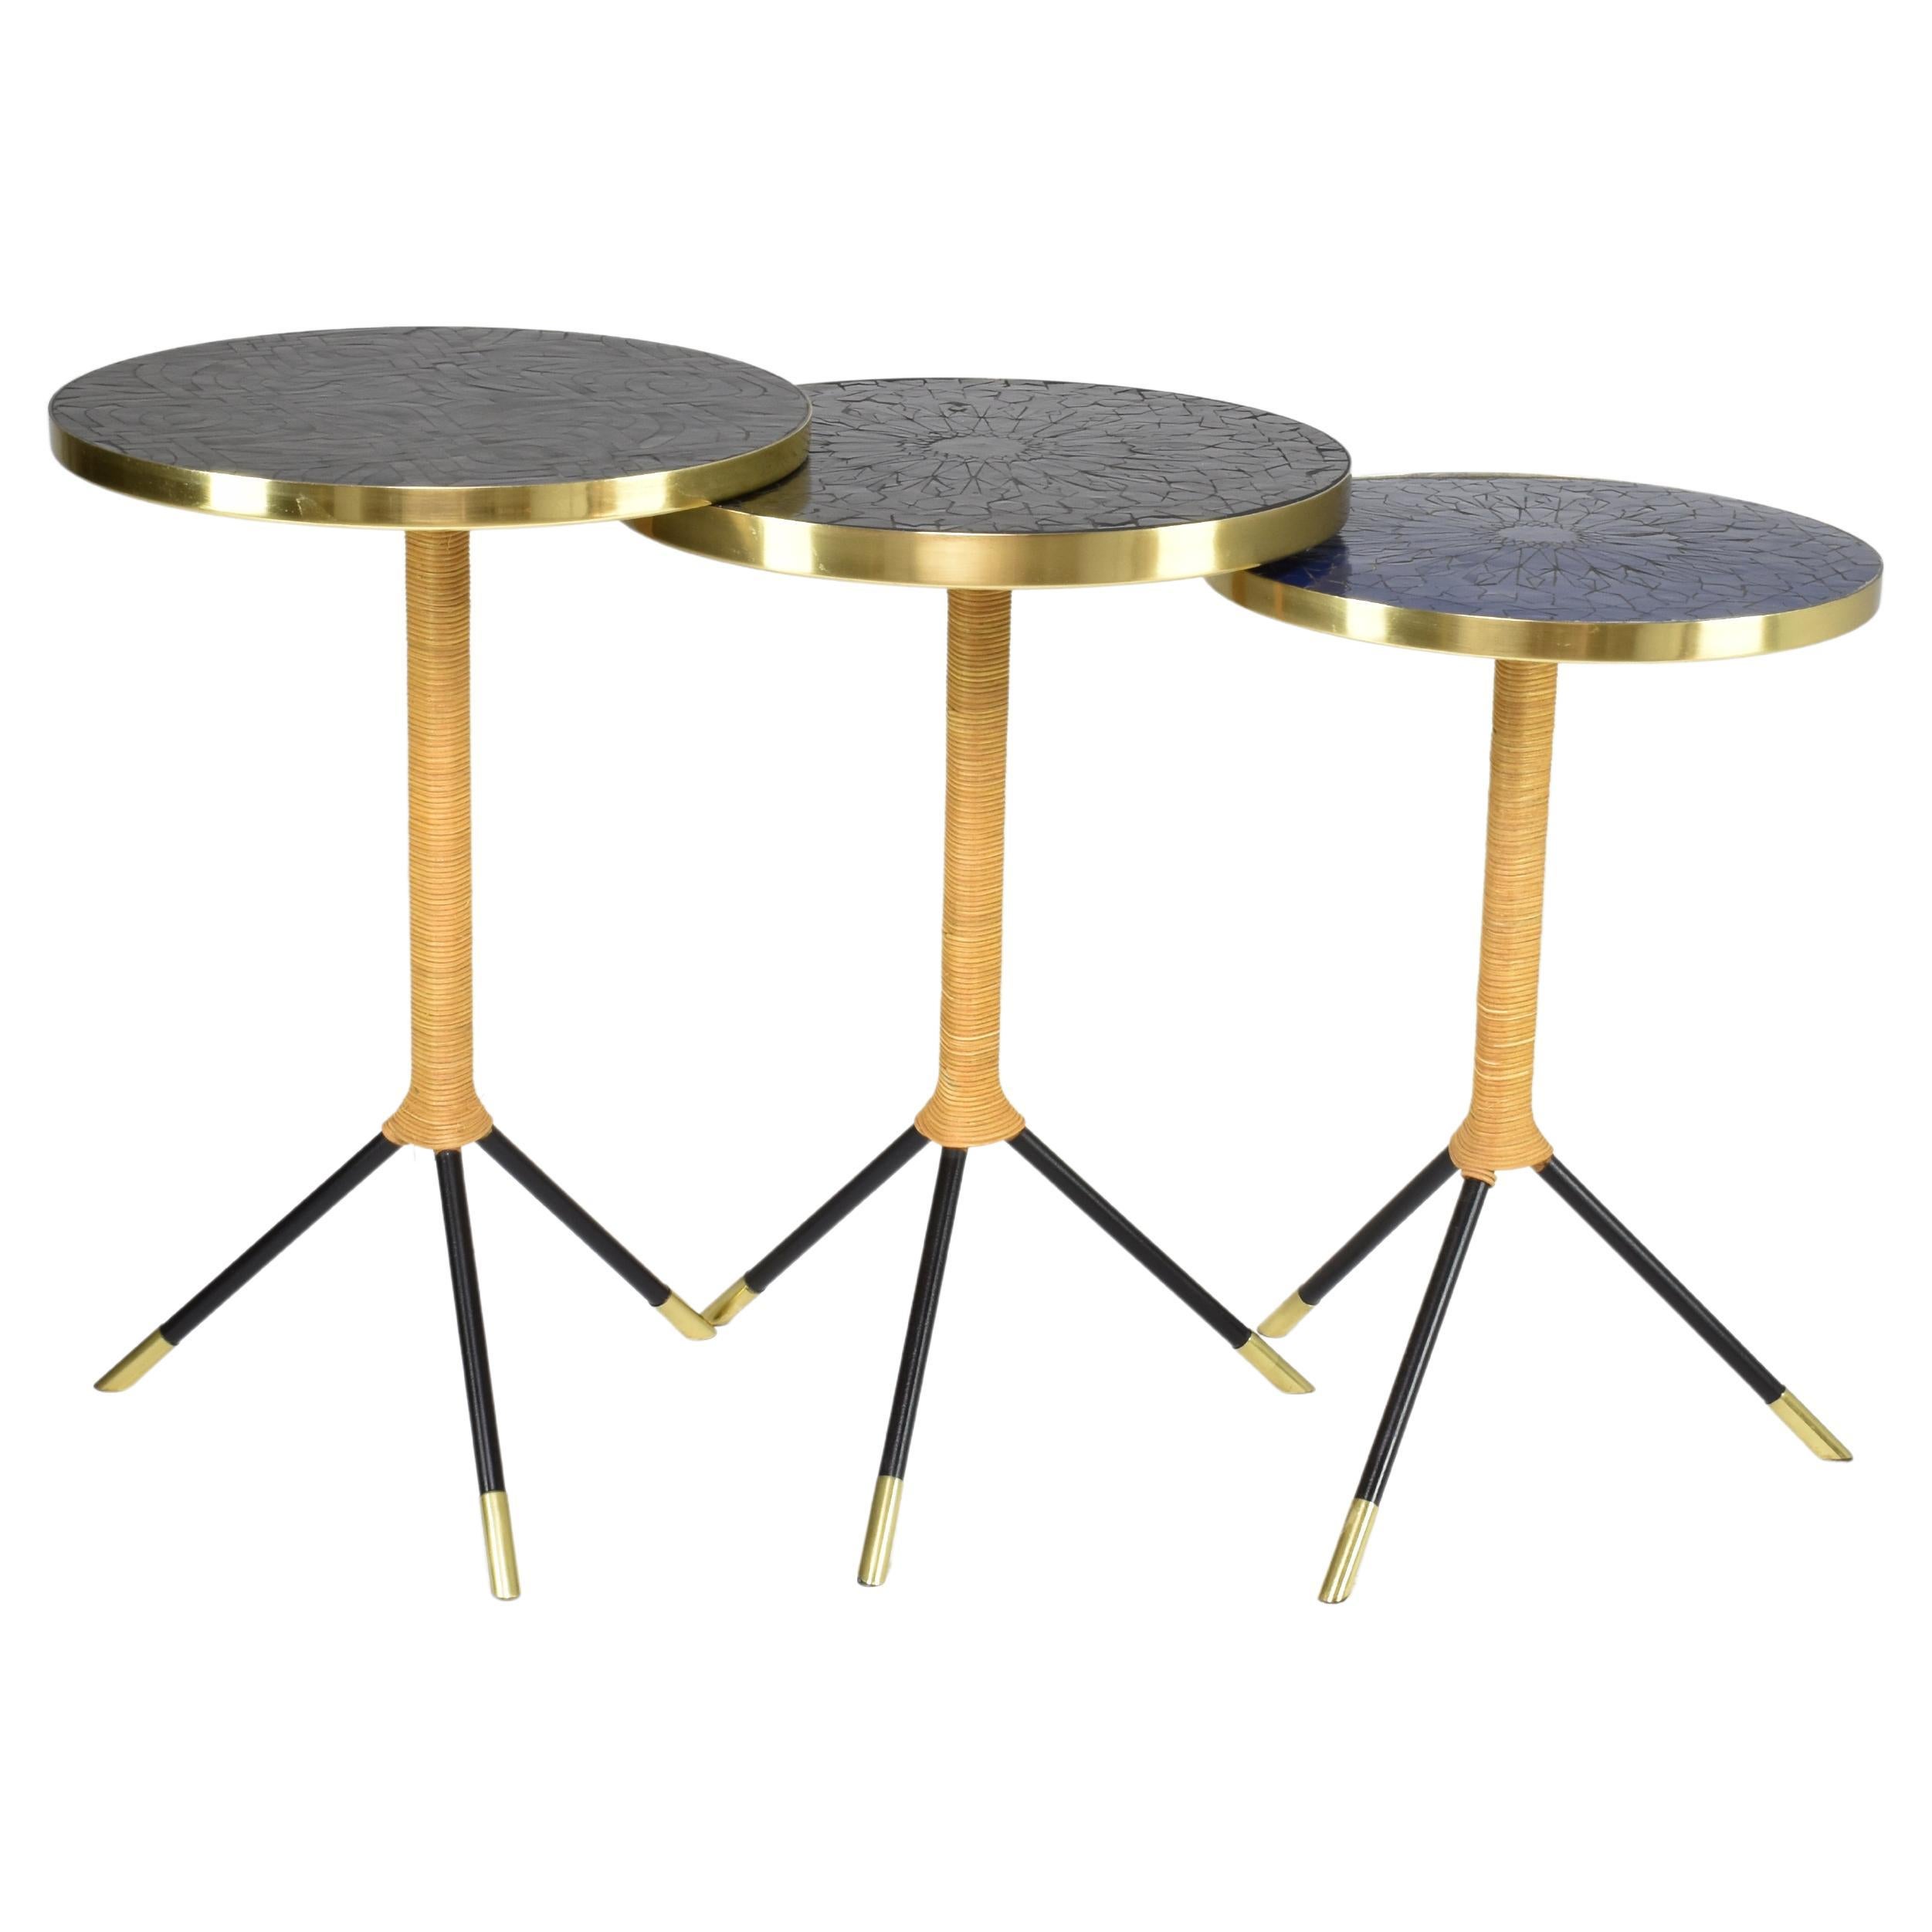 Set of Three Contemporary Mosaic Brass and Rattan Side Tables by JAS